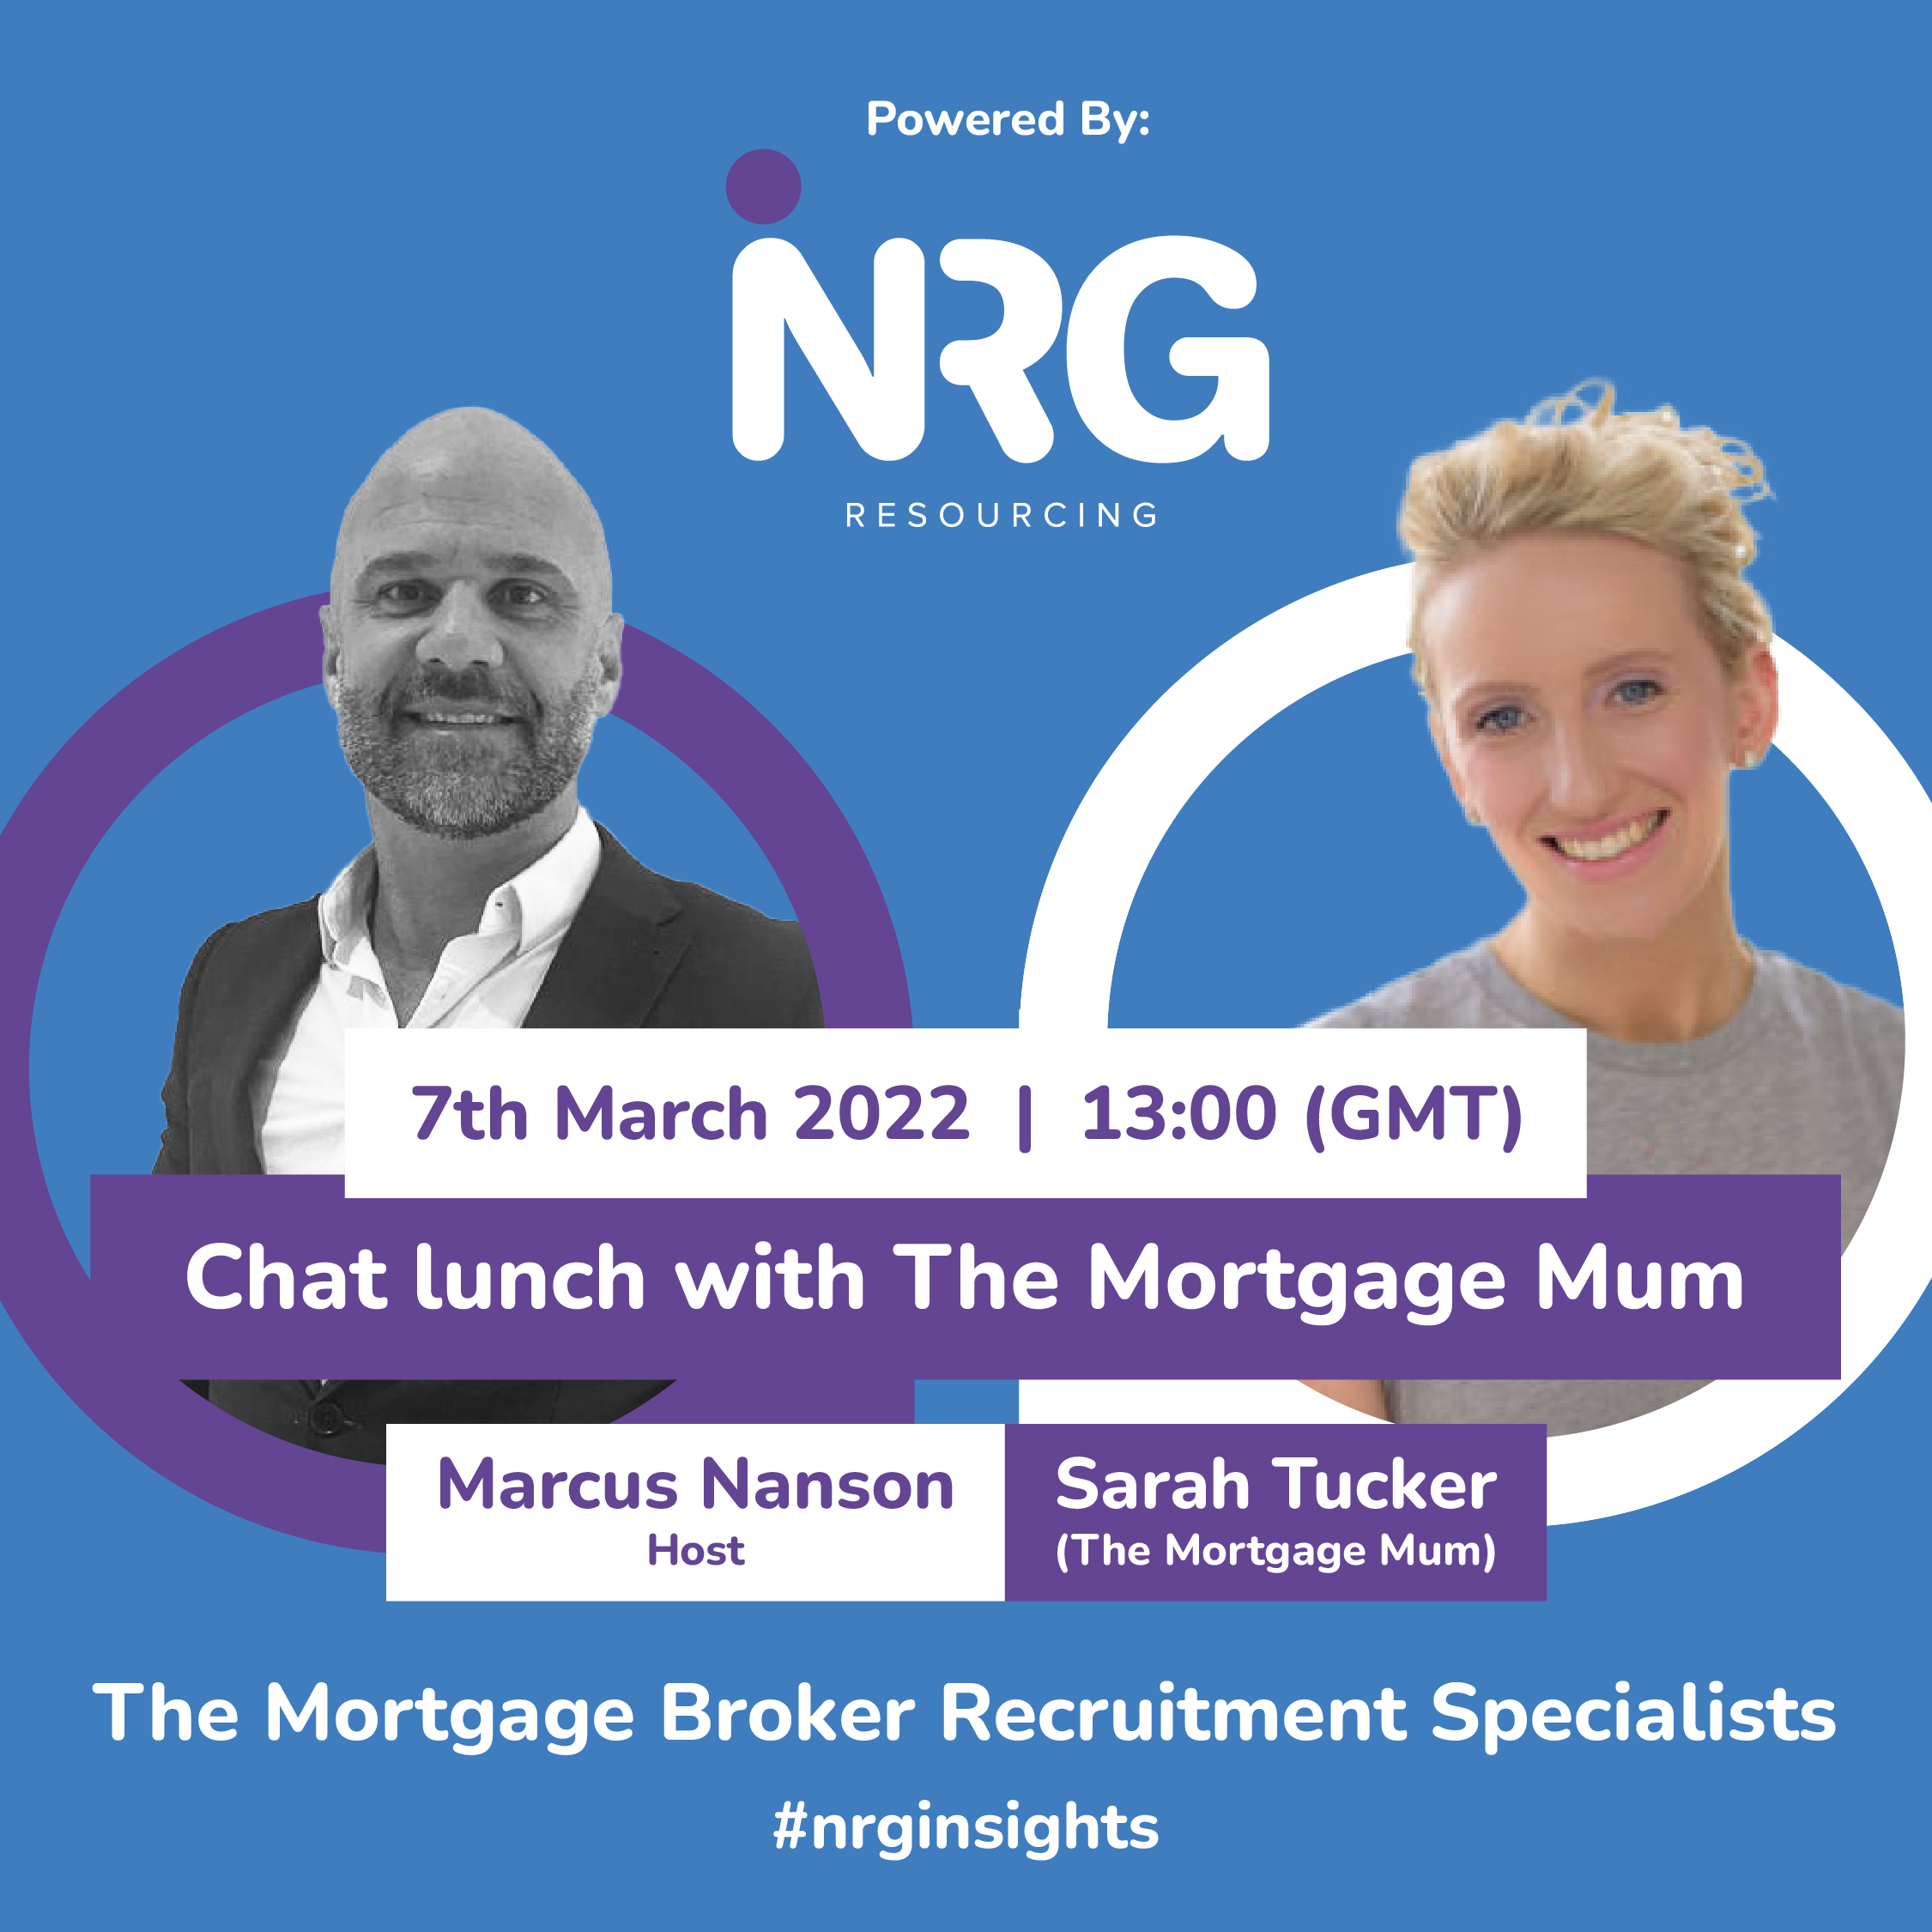 NRG Insights flyer, showing hosts Marcus Nanson and The Mortgage Mum